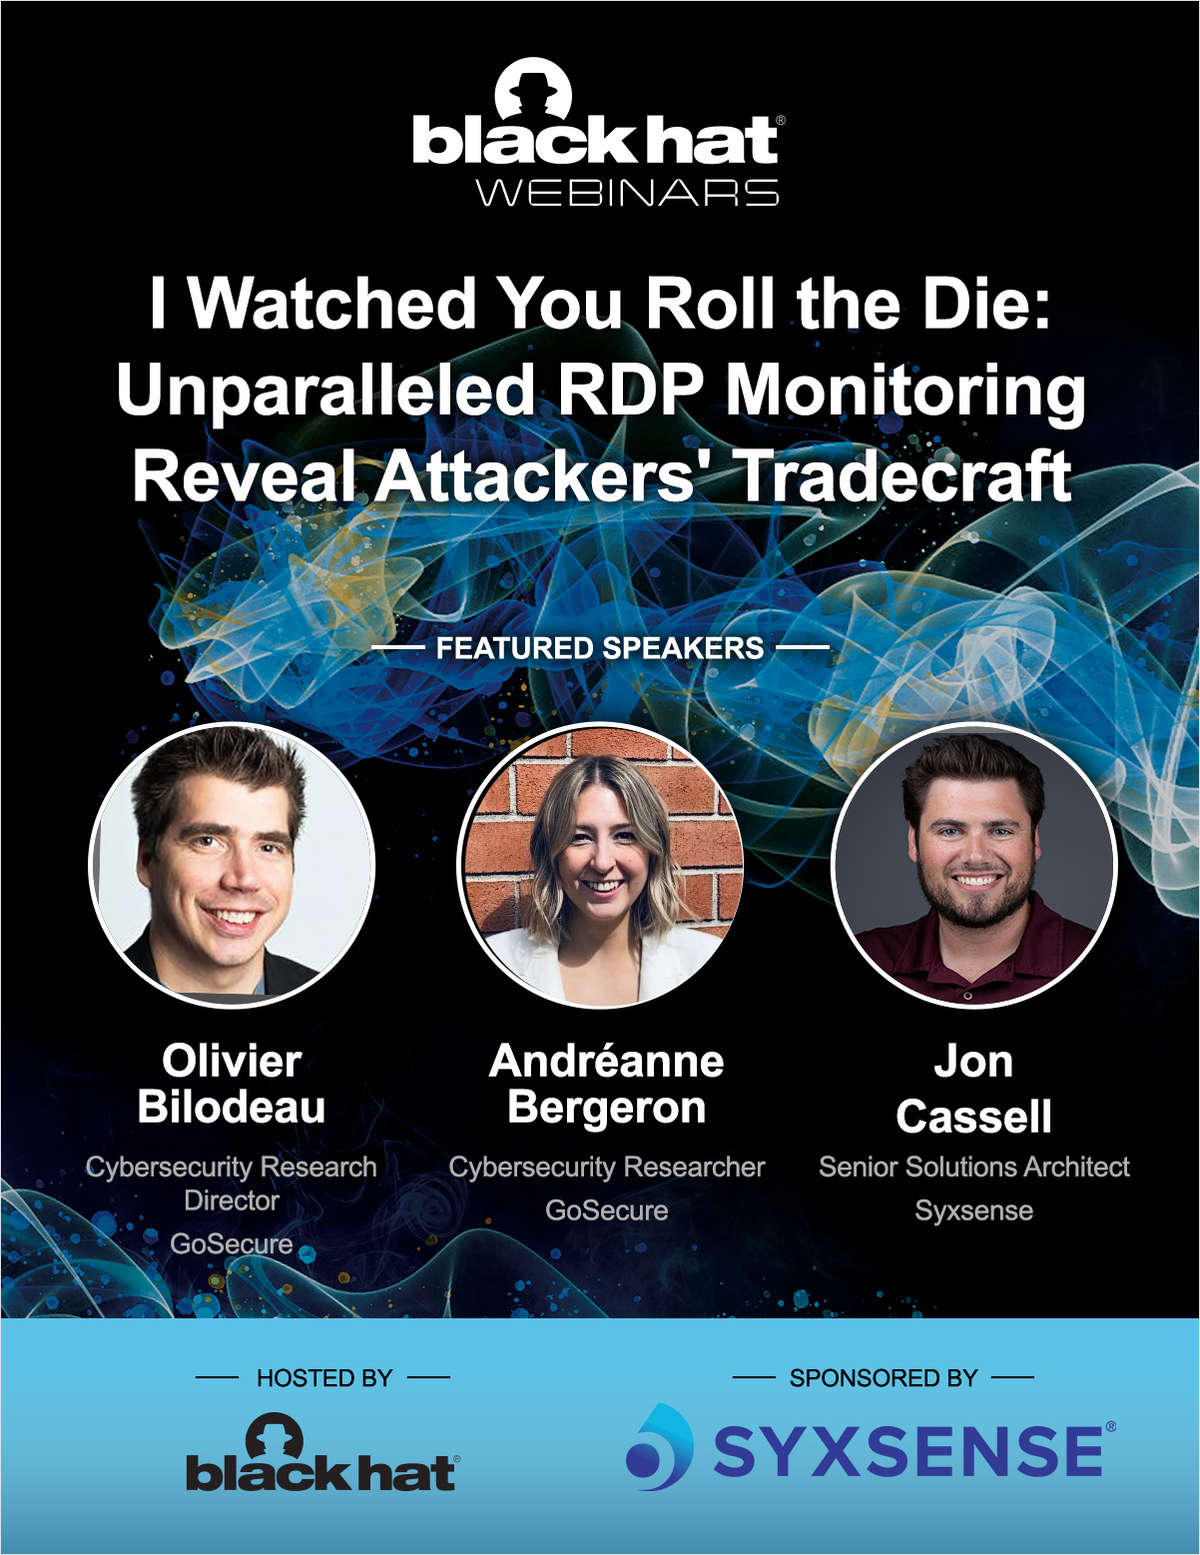 I Watched You Roll the Die: Unparalleled RDP Monitoring Reveal Attackers' Tradecraft